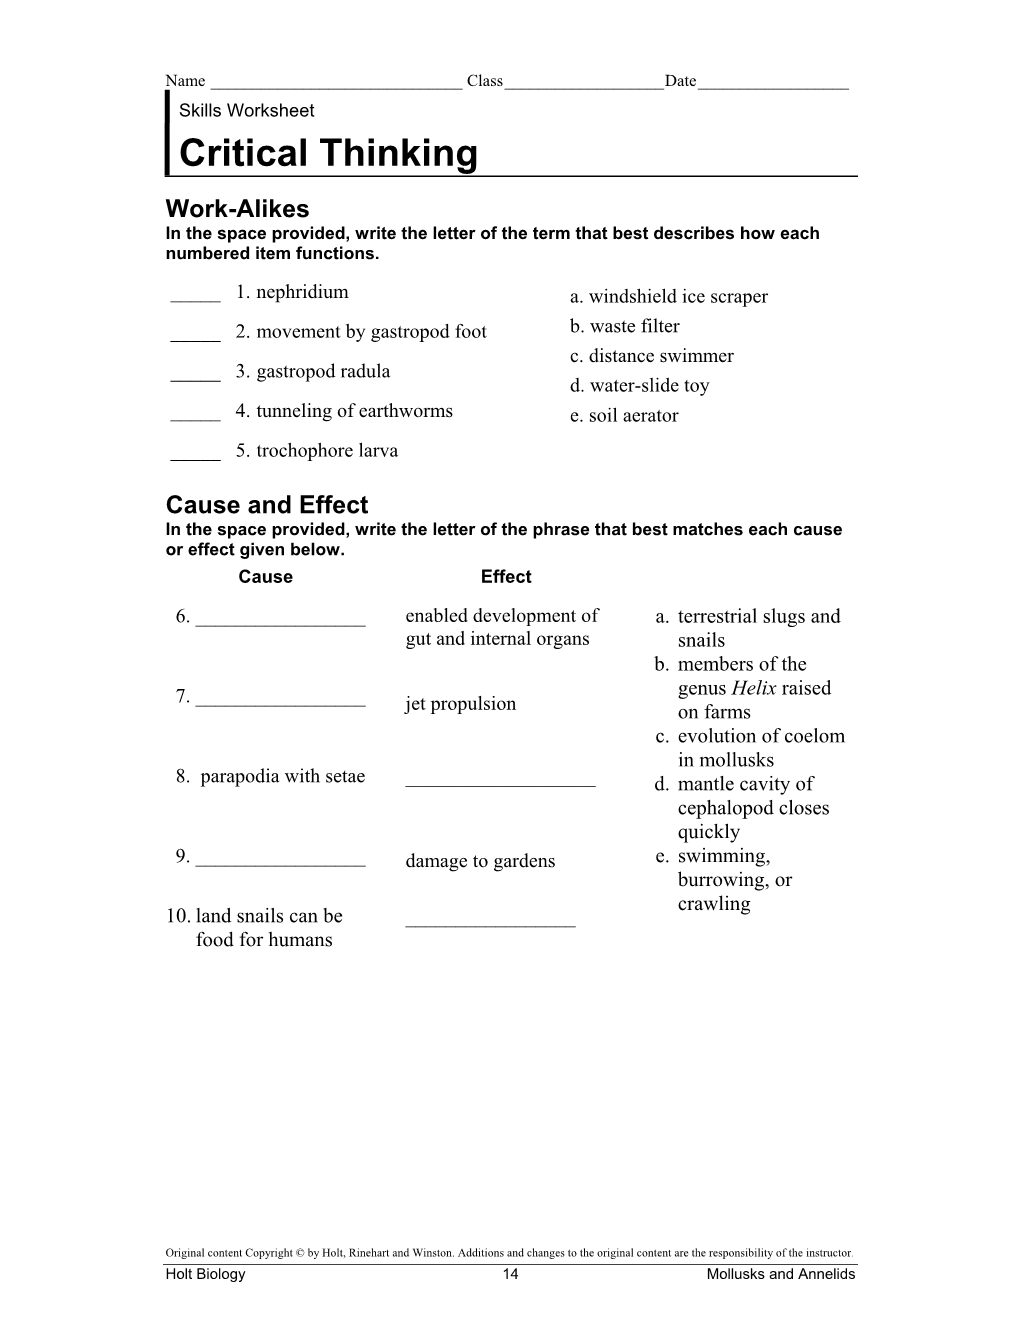 Critical Thinking Work-Alikes in the Space Provided, Write the Letter of the Term That Best Describes How Each Numbered Item Functions